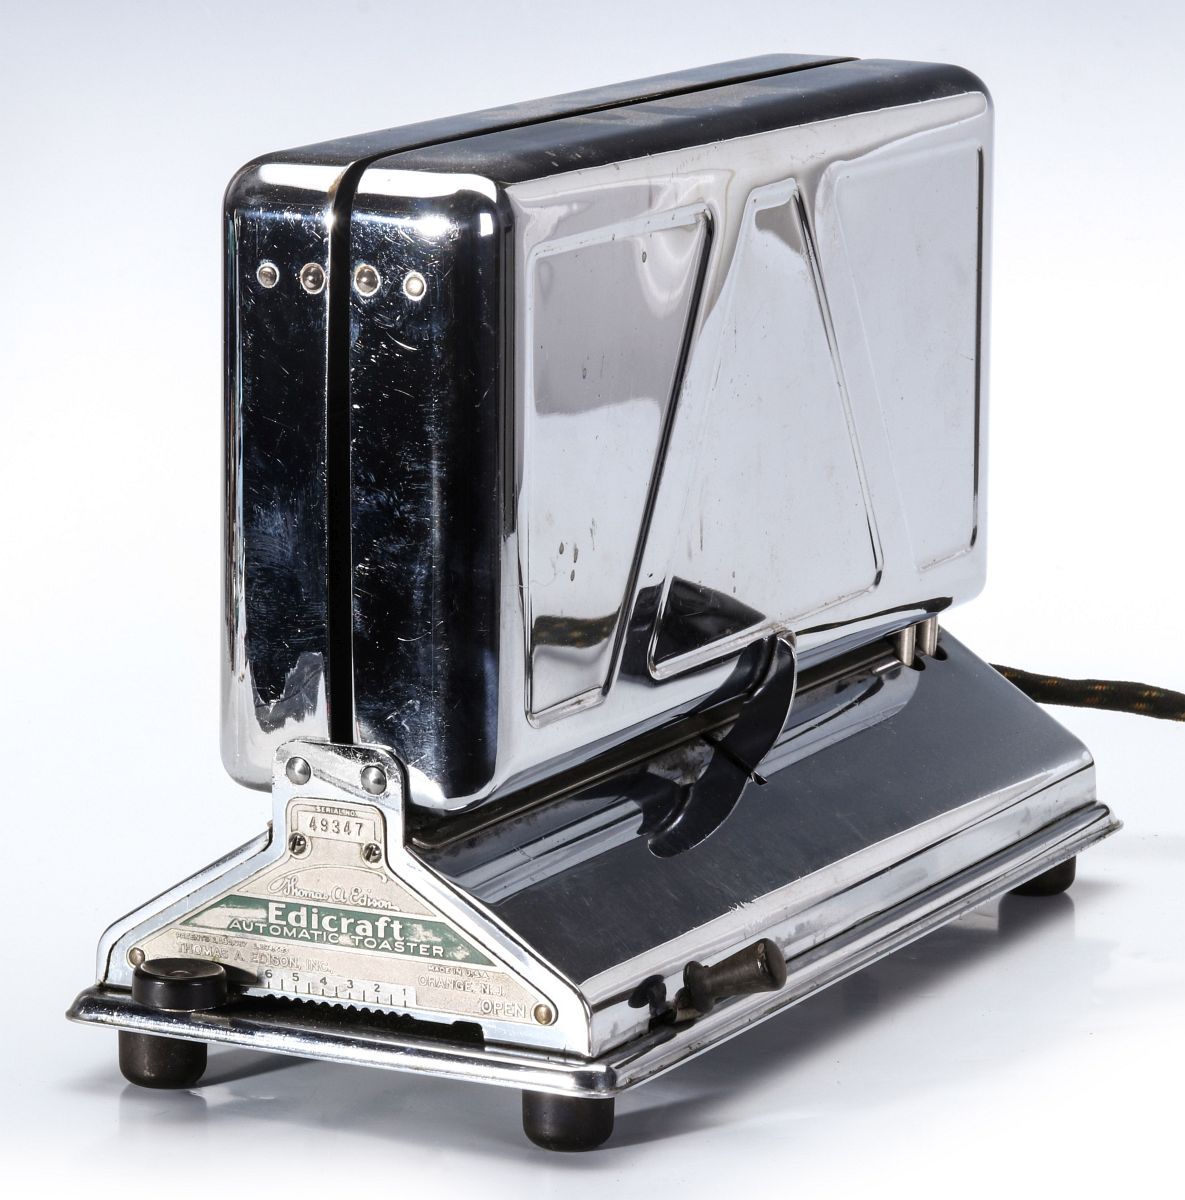 AN EDISON EDICRAFT AUTOMATIC CLAM SHELL TOASTER